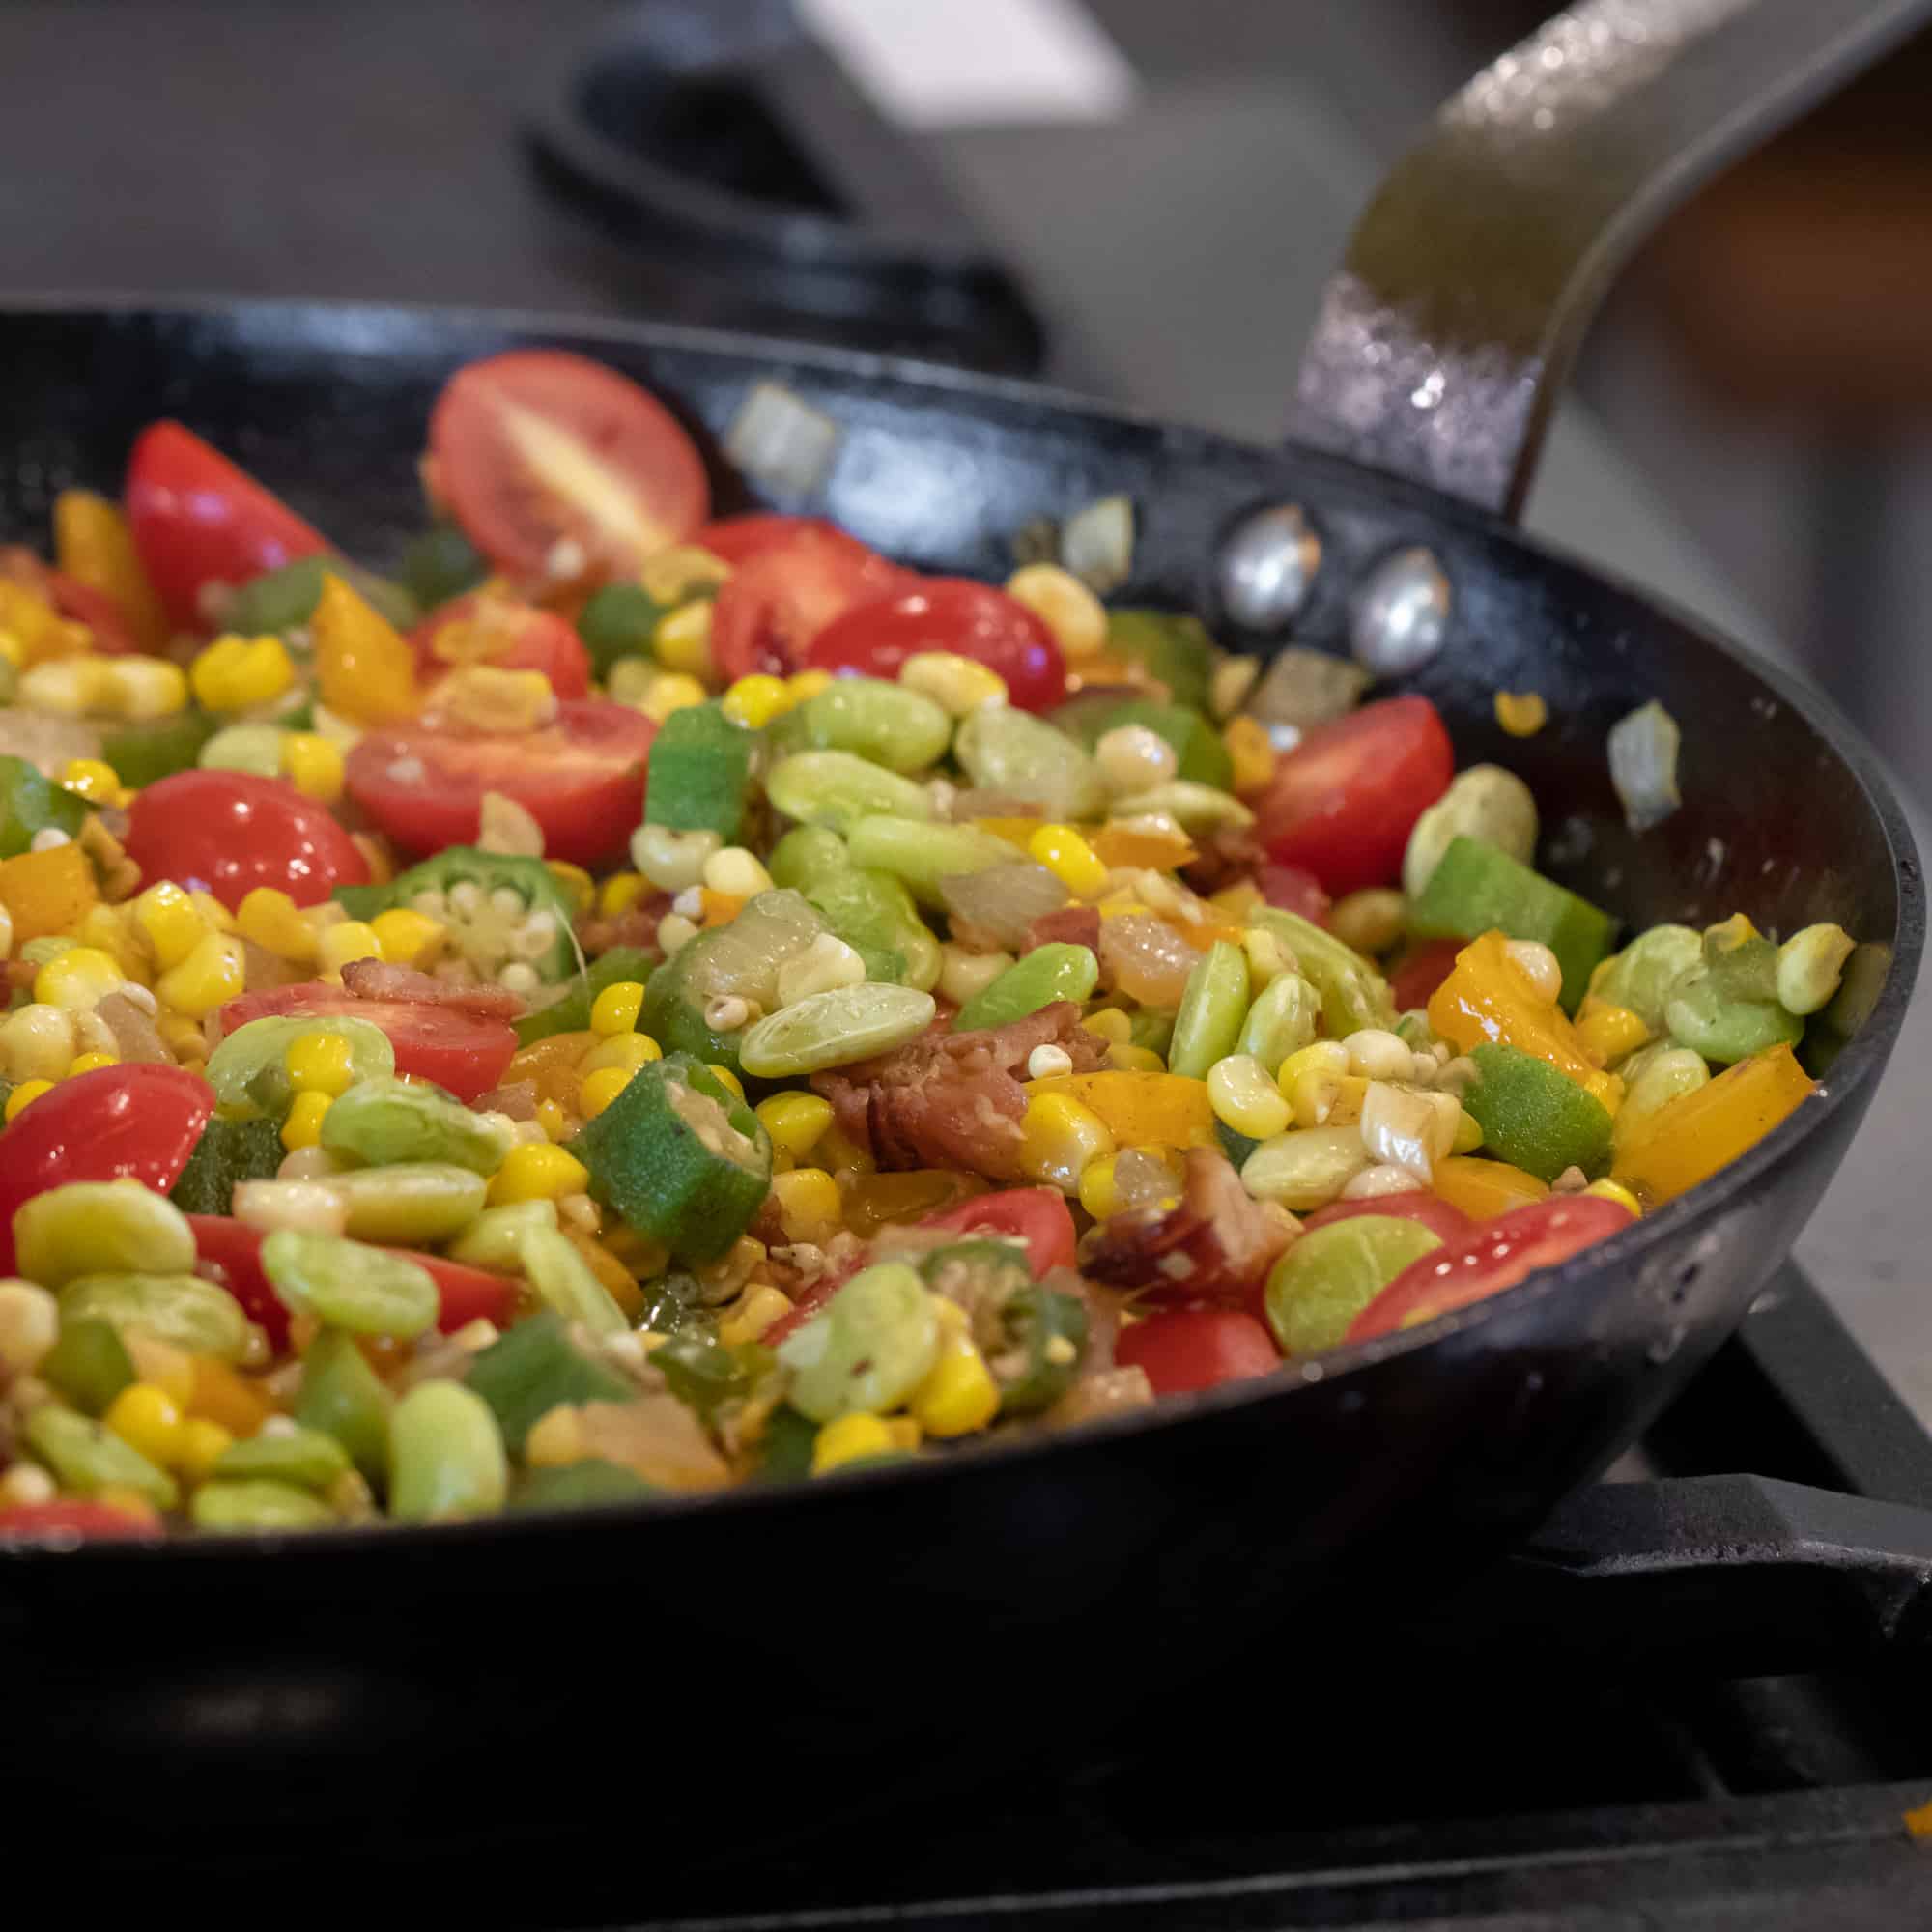 Easy skillet recipe for how to make succotash with lima beans, bacon, corn, okra, grape tomatoes. Classic southern side dish comfort food.